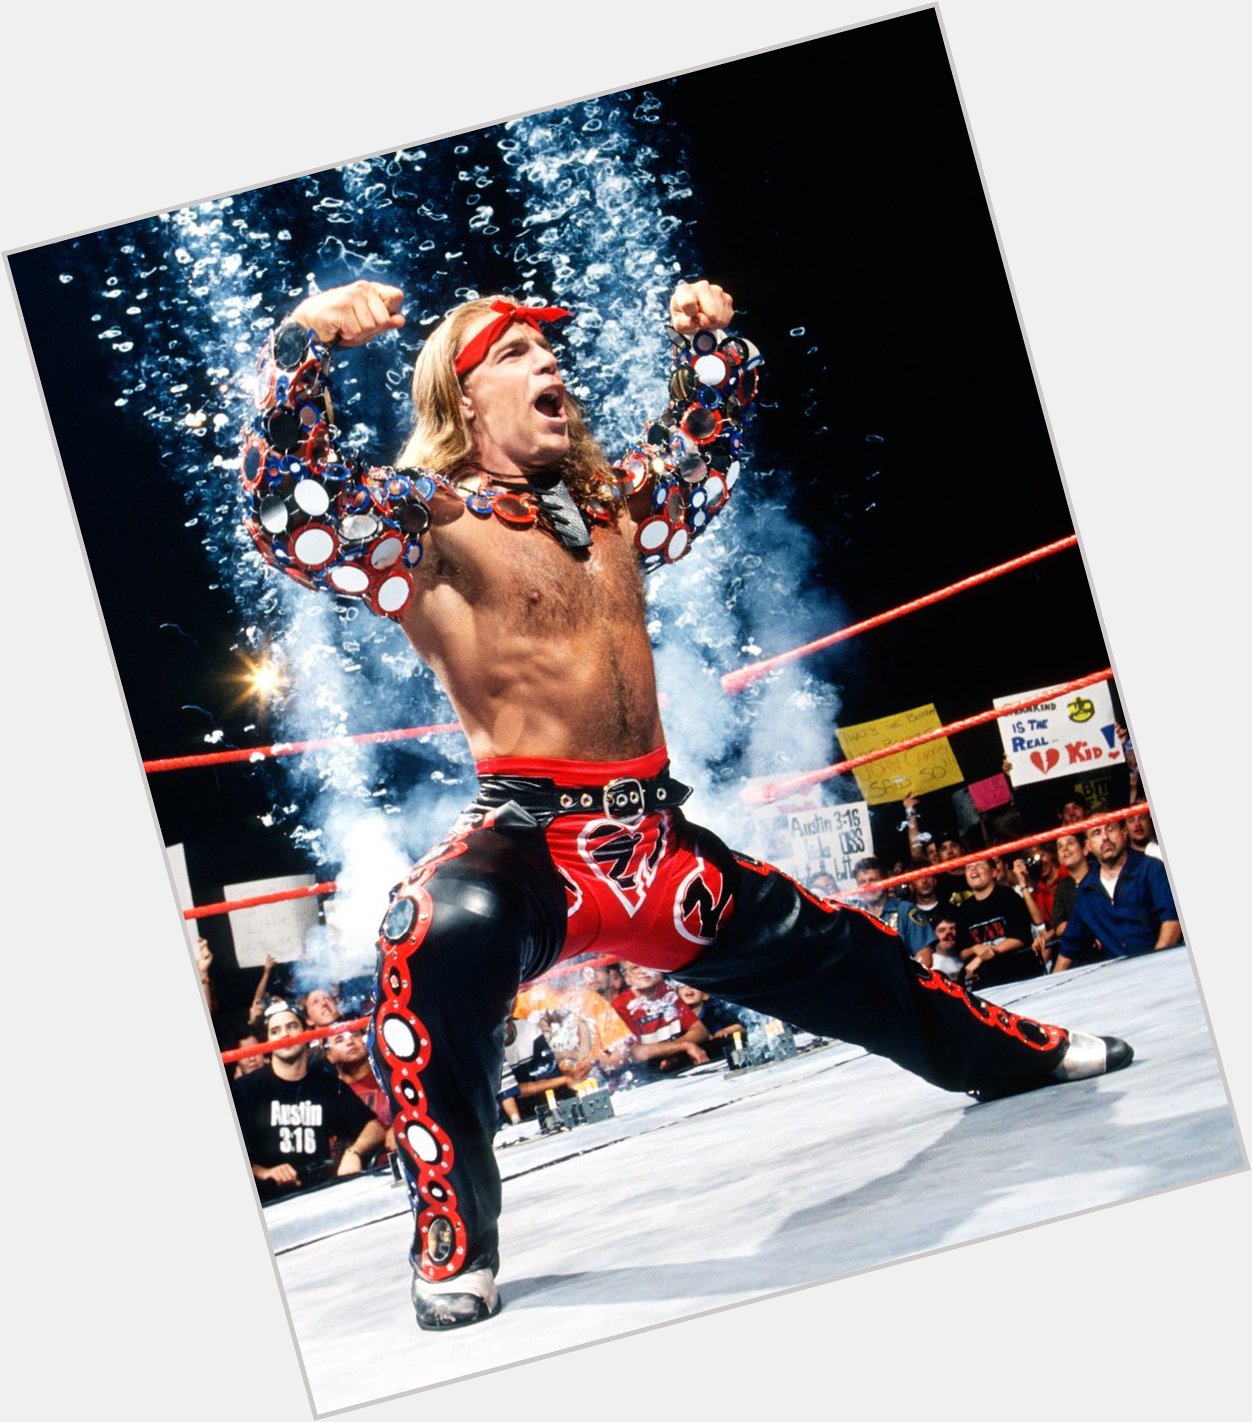 Happy Birthday to Shawn Michaels. One of the best technicak wrestler of all time. And Of course Mr. WRESTLEMANIA. 